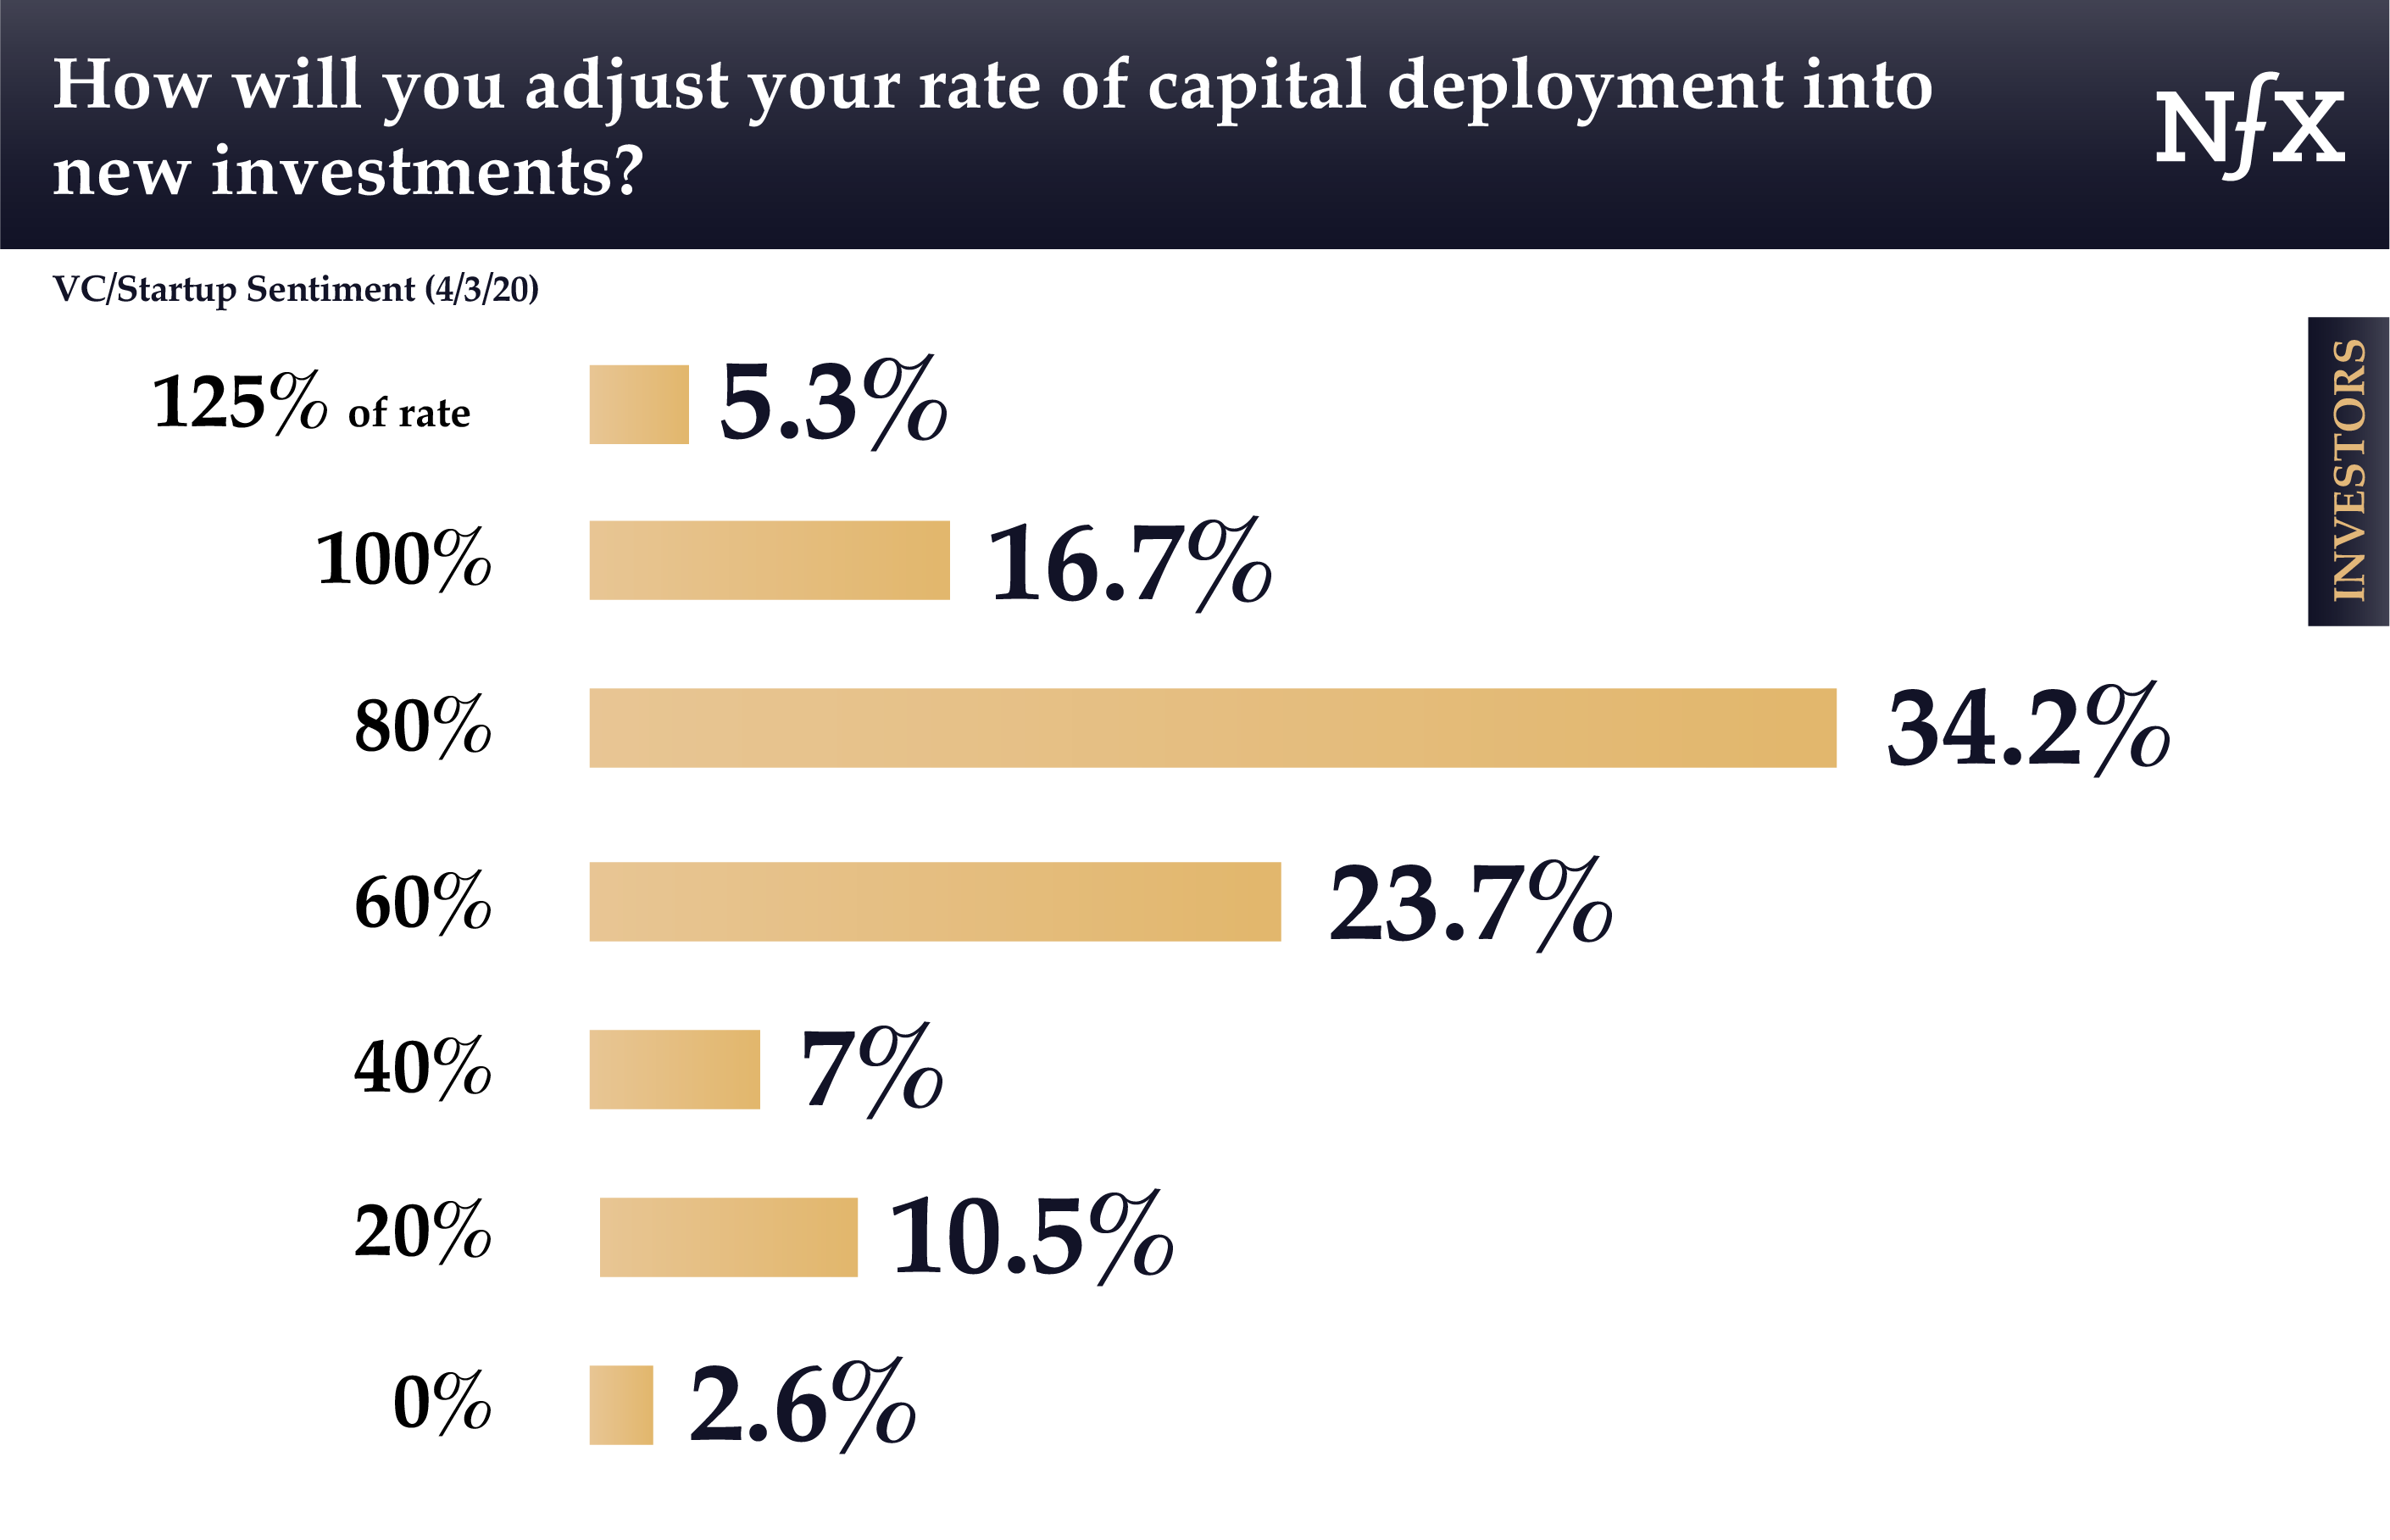 Capital deployment into new investments